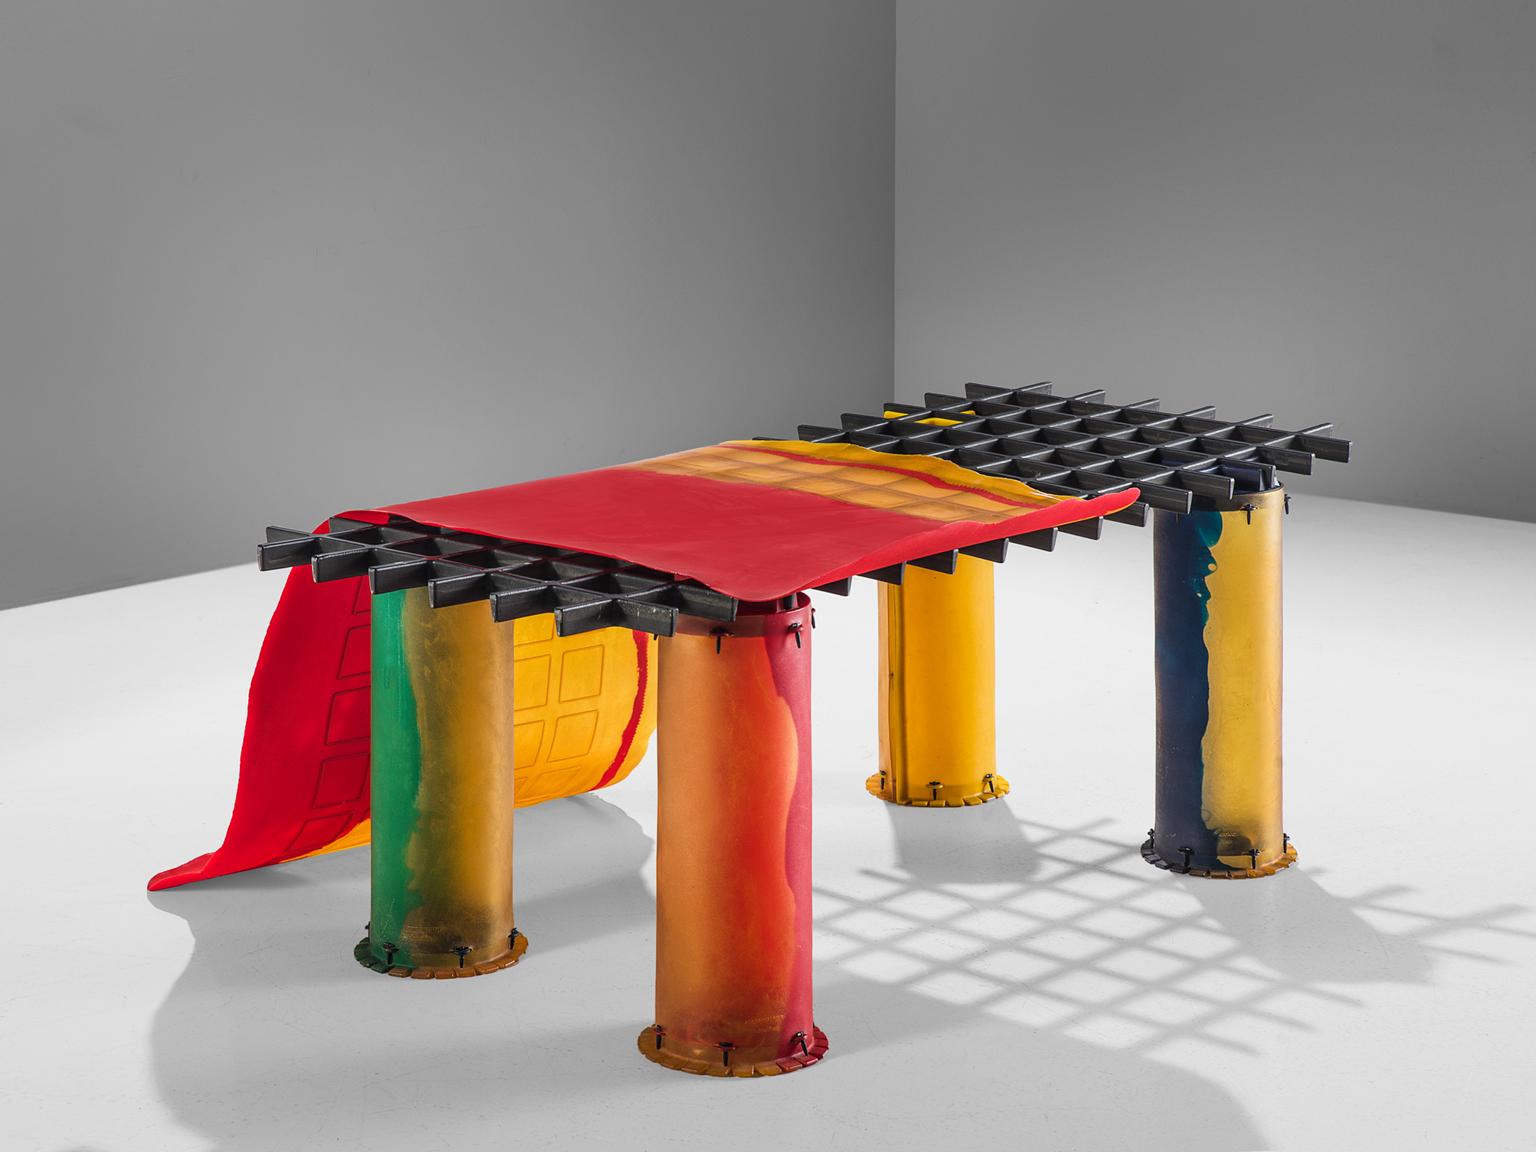 Gaetano Pesce for Zerodesigno, 'Nobody's Perfect' dining table, red, blue, green and yellow resin, metal, Italy, 2002.

This sculptural dining table is designed by Gaetano Pesce. The title of the table 'Nobody's Perfect' refers to the fact that